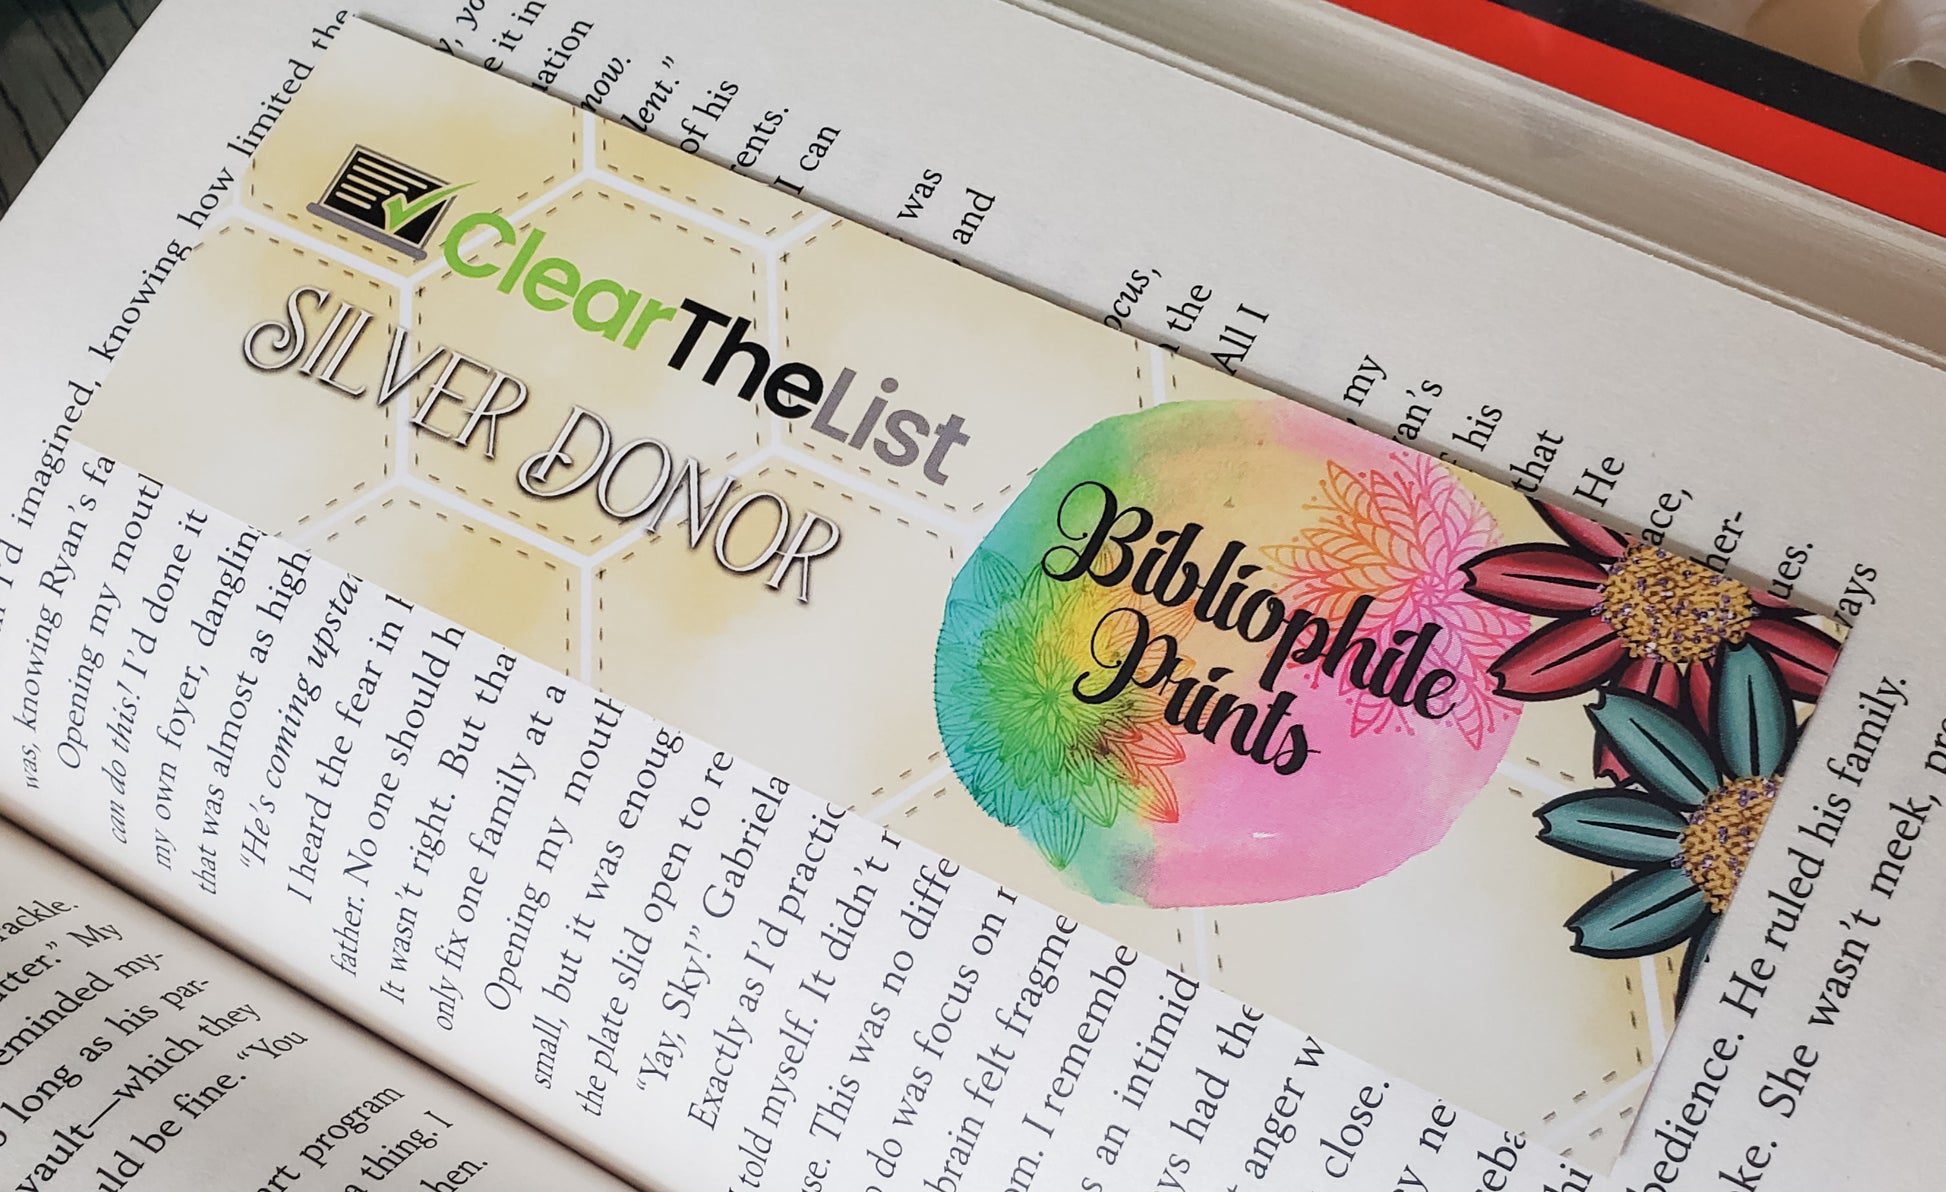 CleartheList Foundation Official Donor Bookmark: Silver Donor, Double Sided Bookmark - bibliophileprints